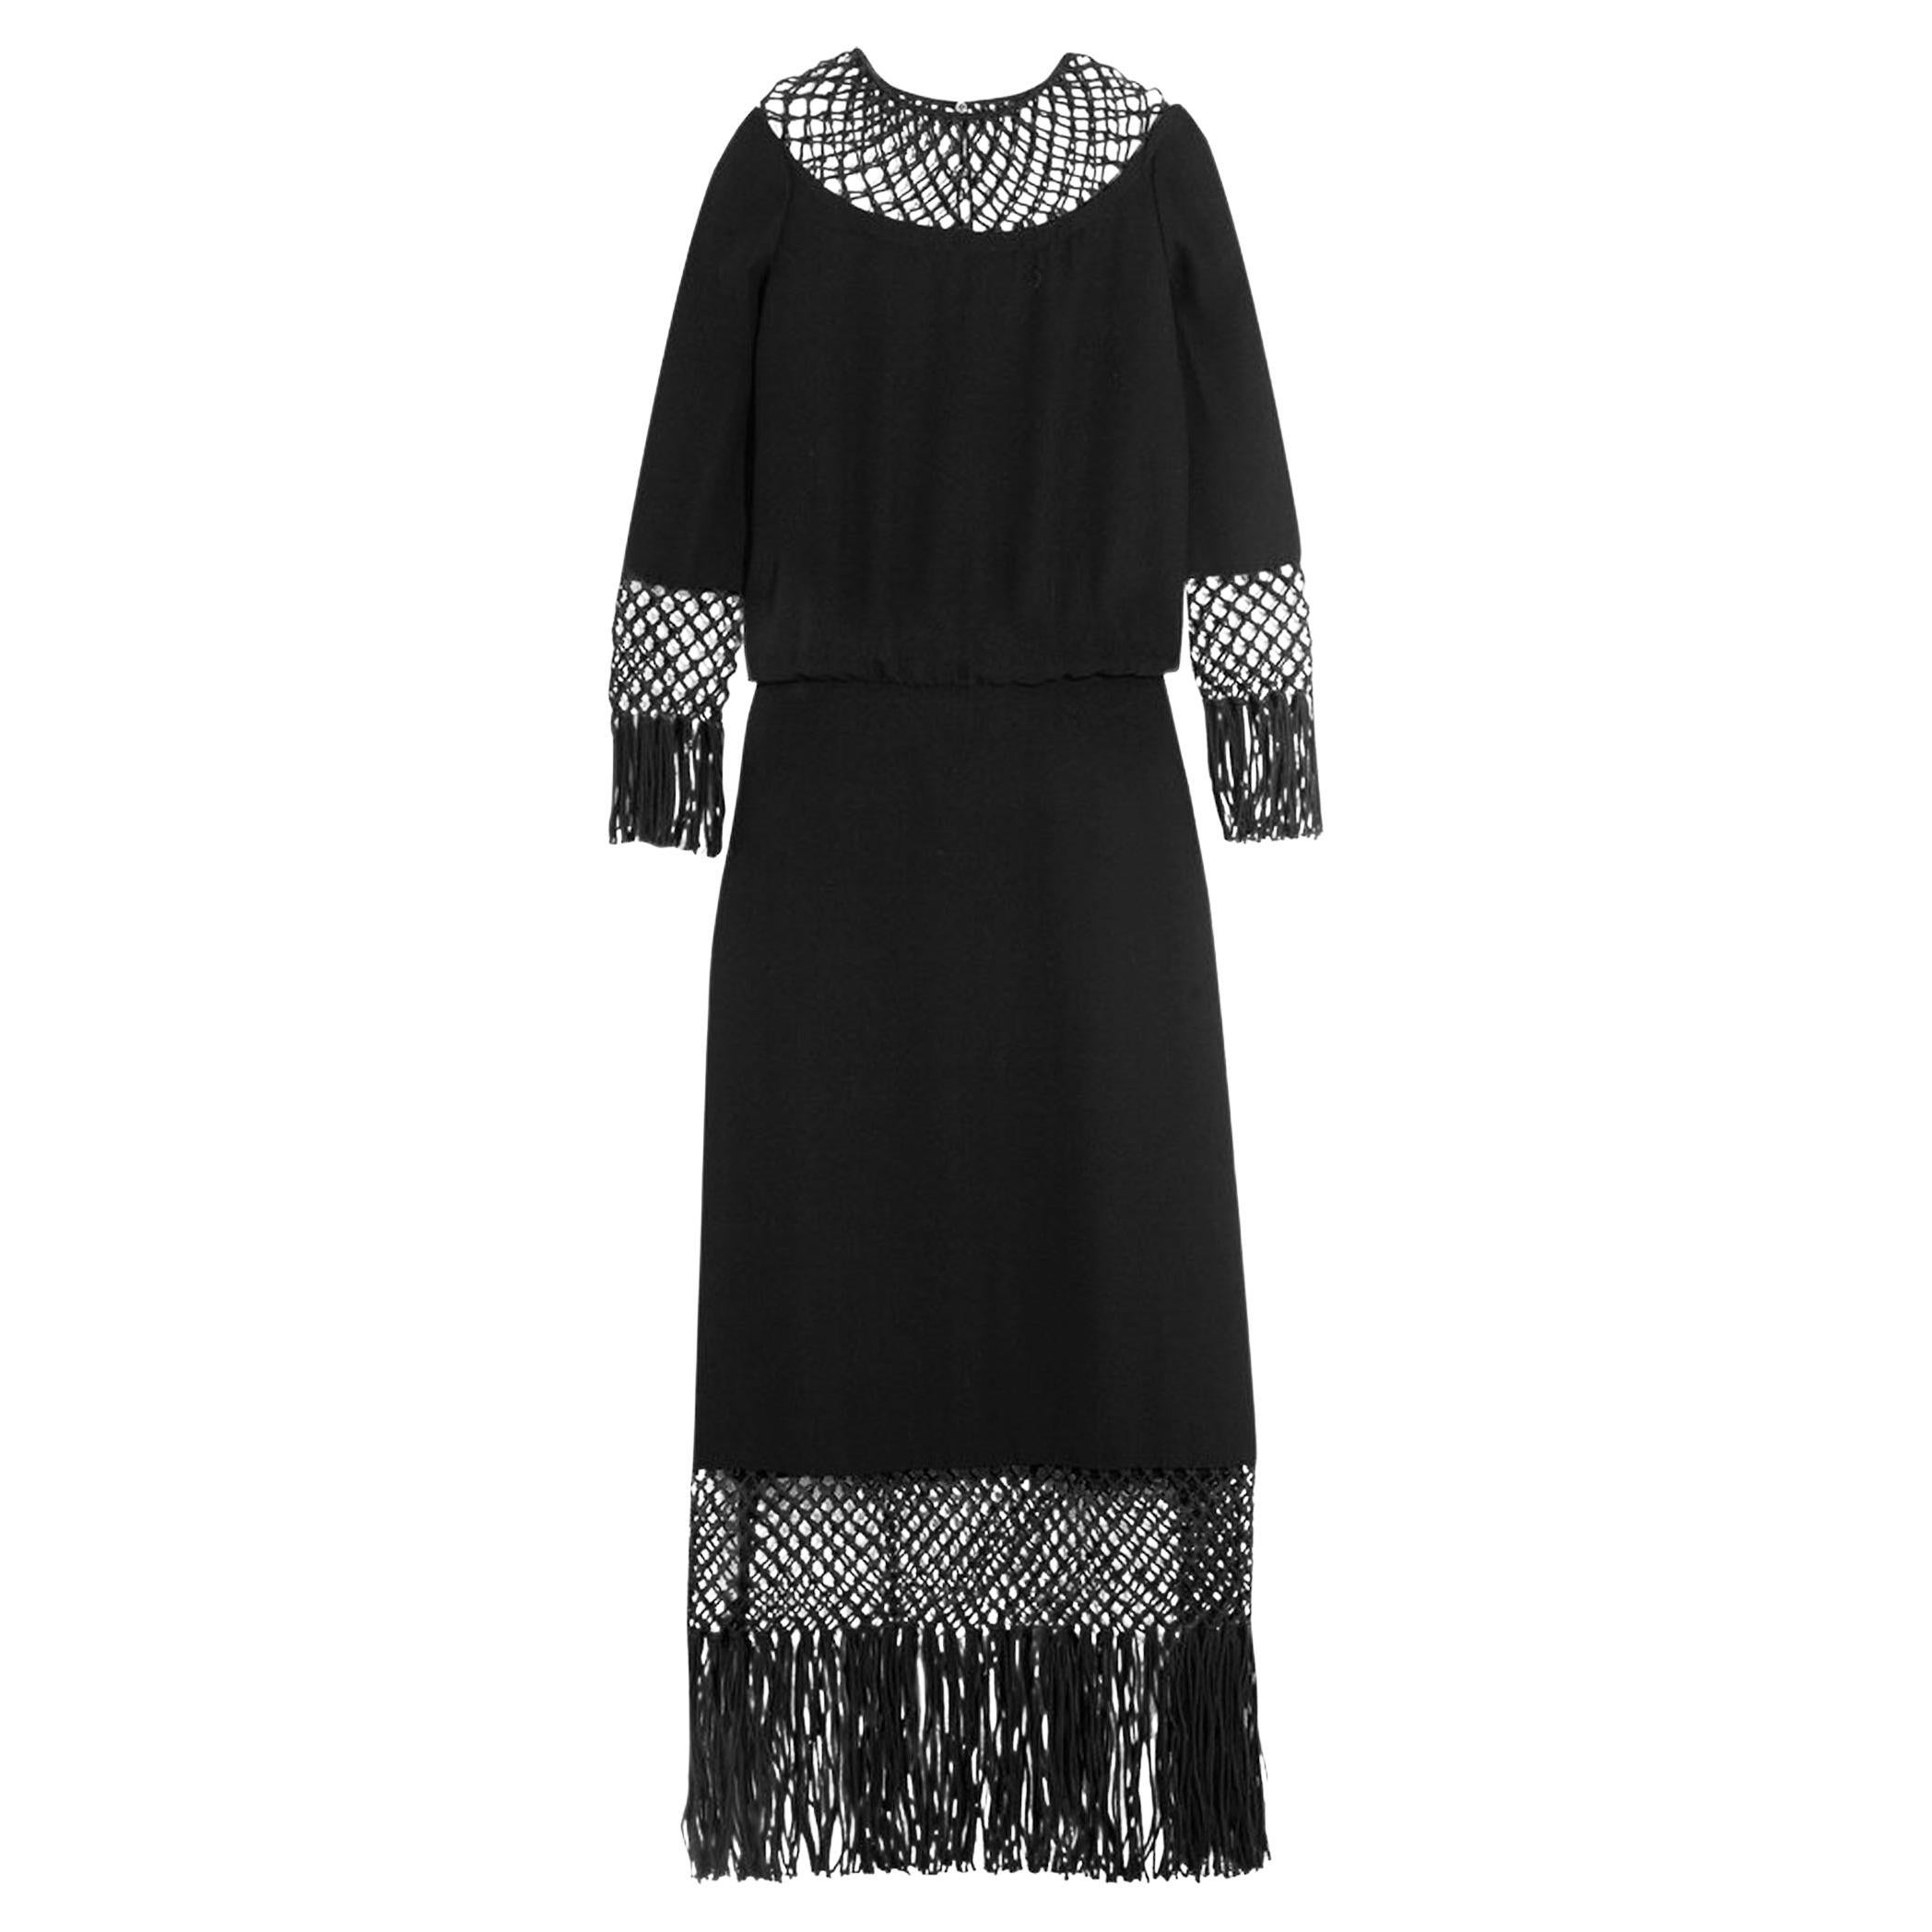 NWT Valentino as seen on Queen Maxima Black Macramé Silk Crepe Fringe Dress 40 For Sale